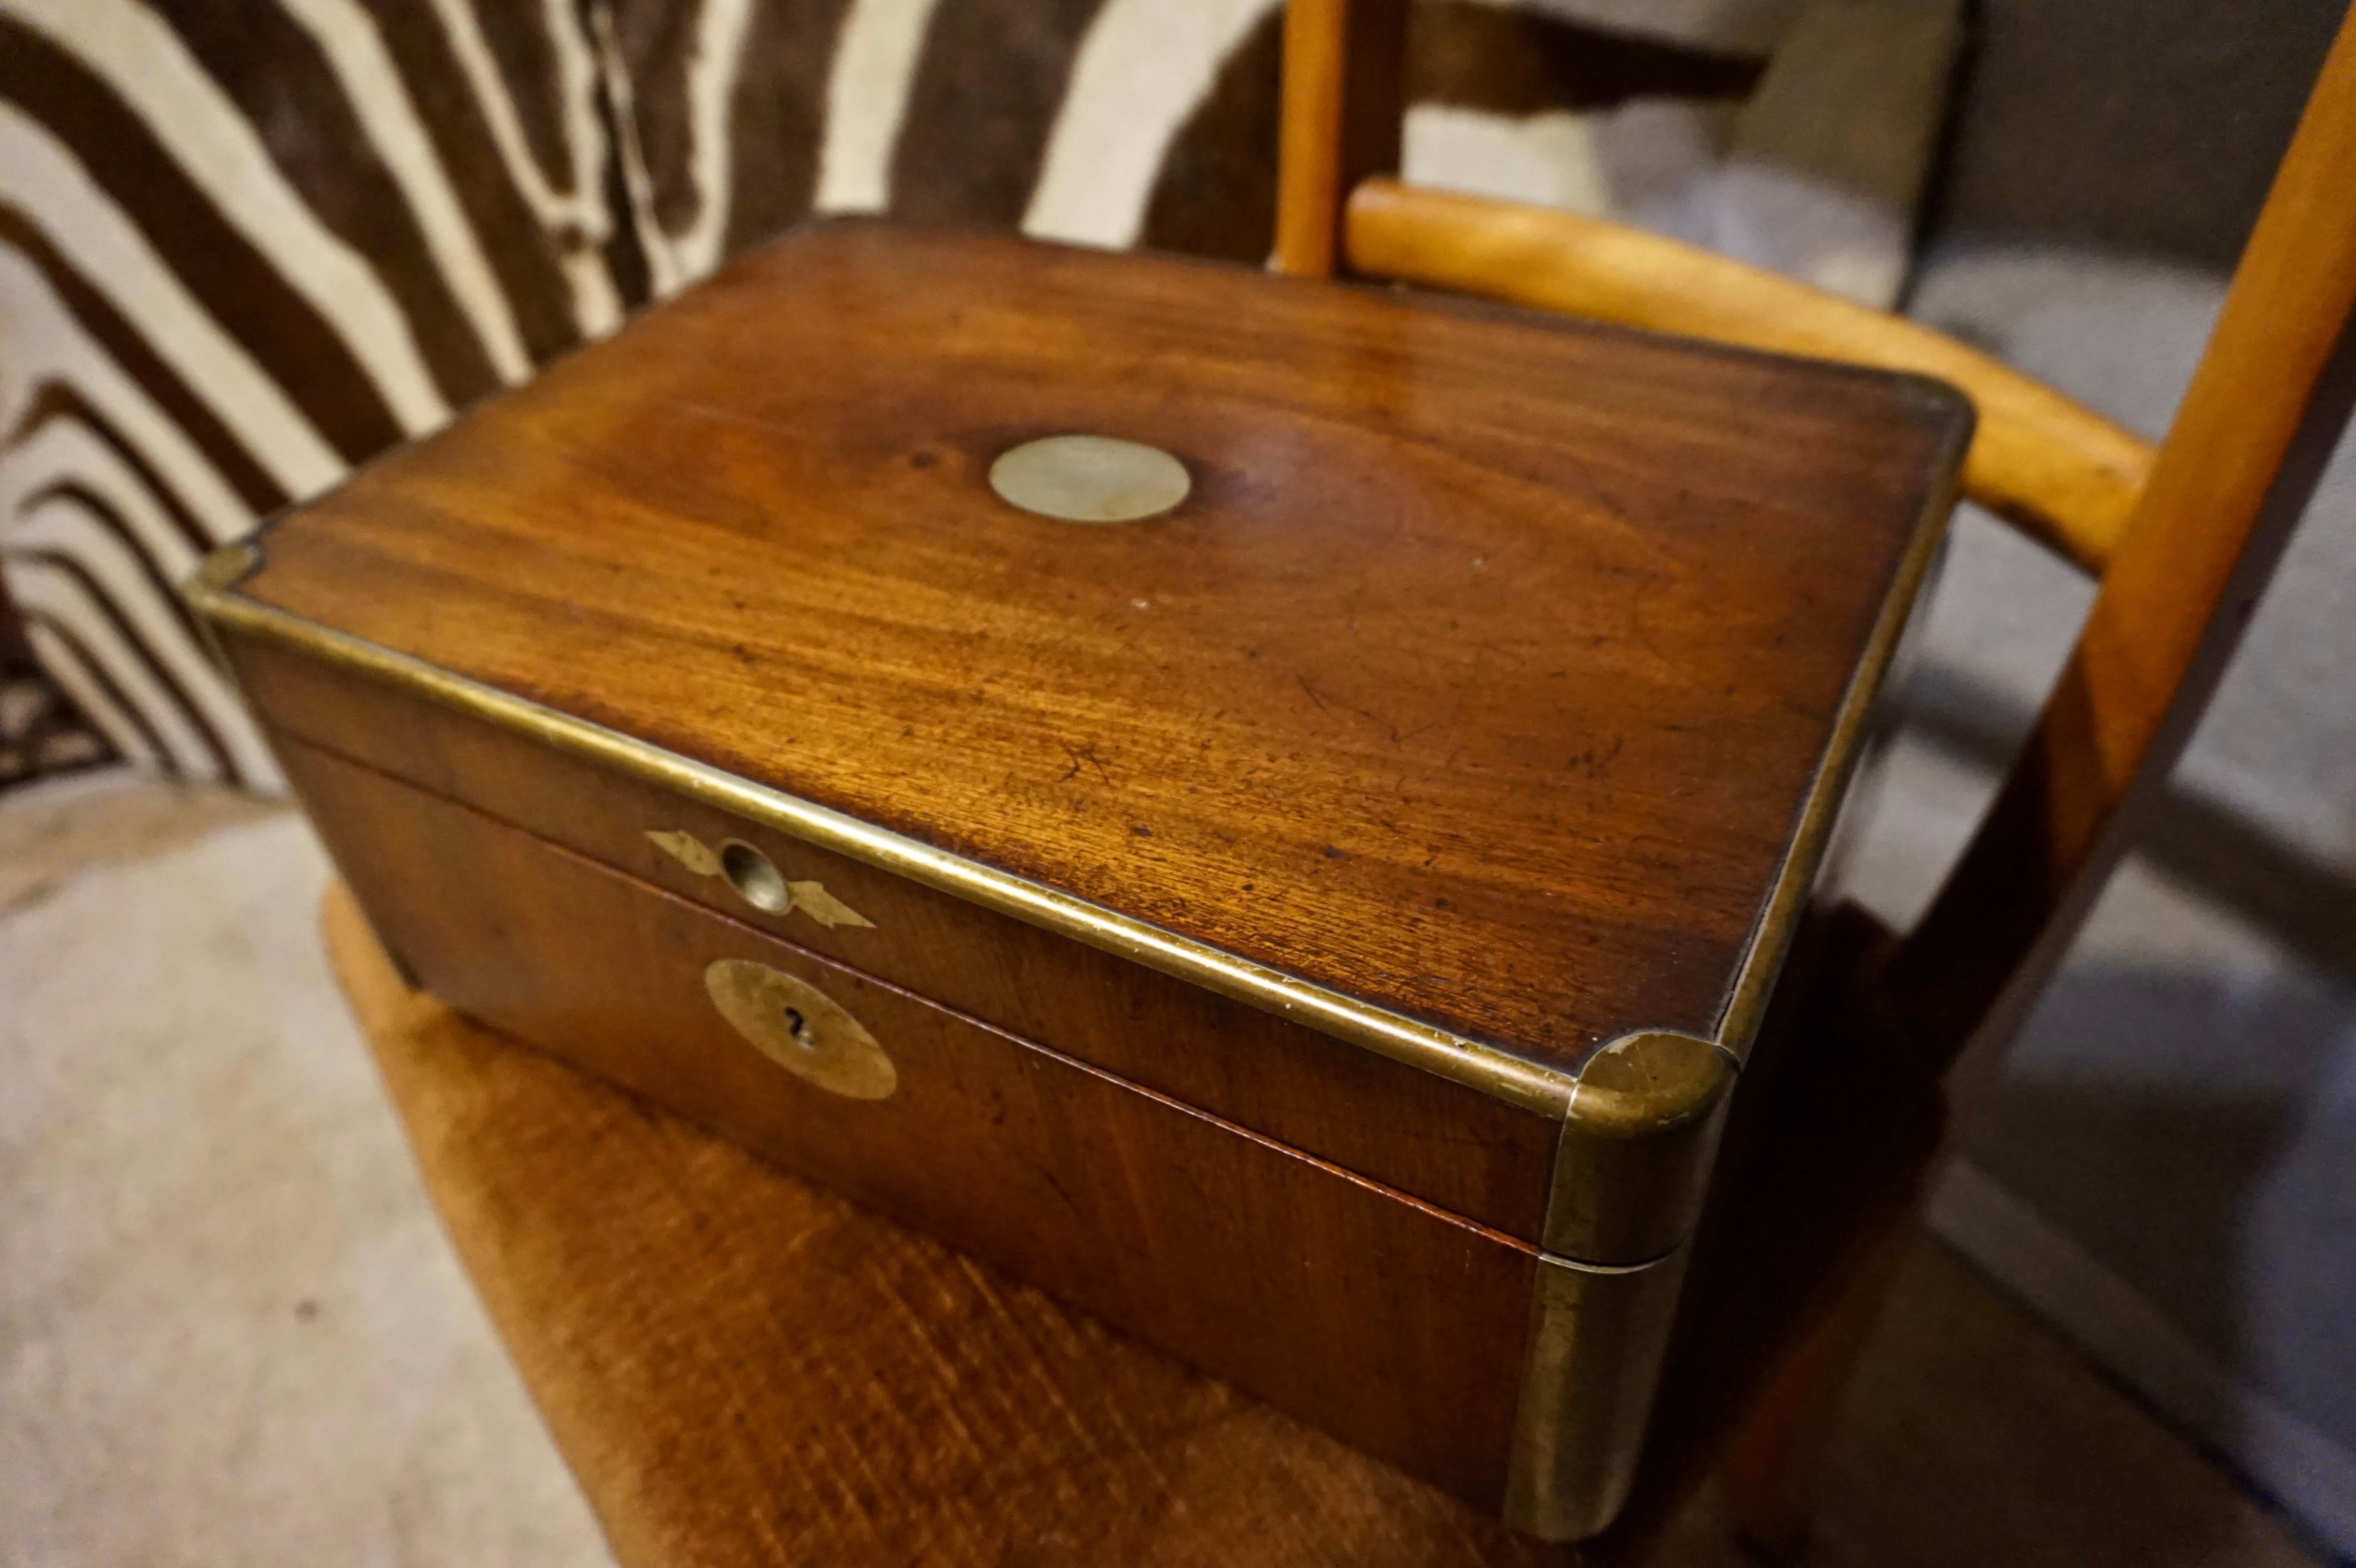 High quality English mahogany and brass fine jewelry box that was likely used for stationary as well. Attention to detail, originality and surviving key,

circa 1870s.